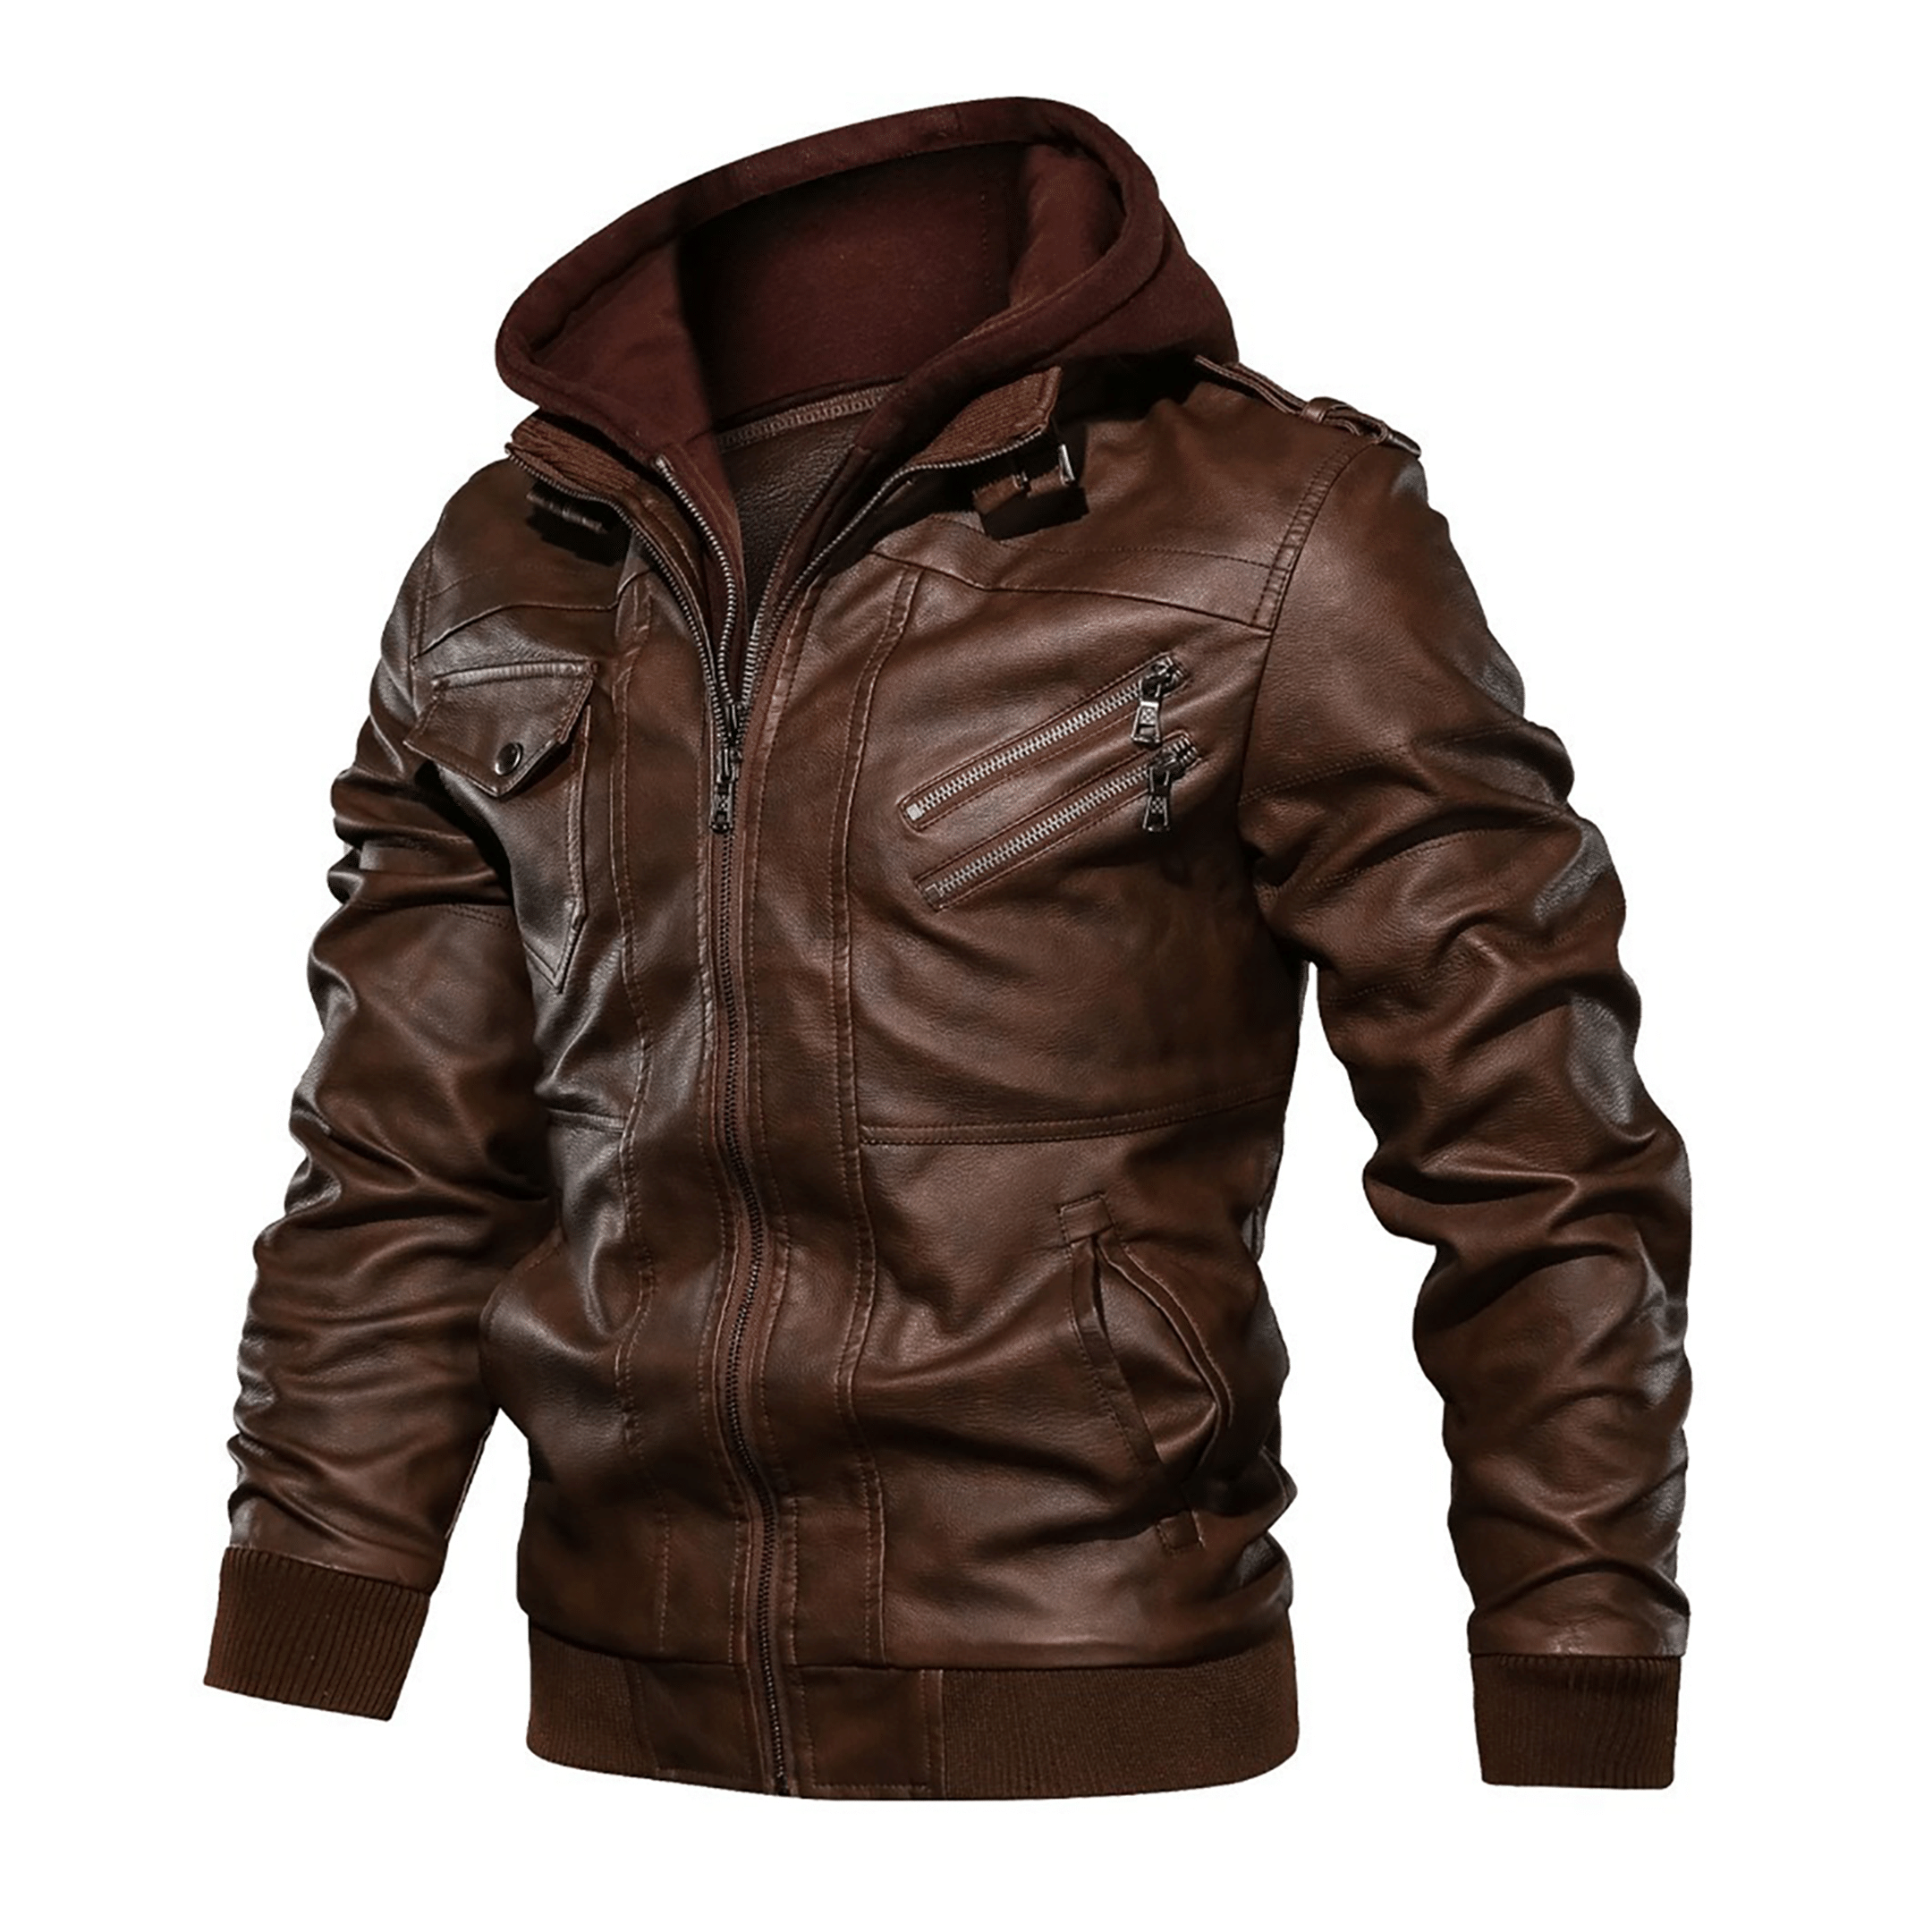 Top leather jackets and latest products 471